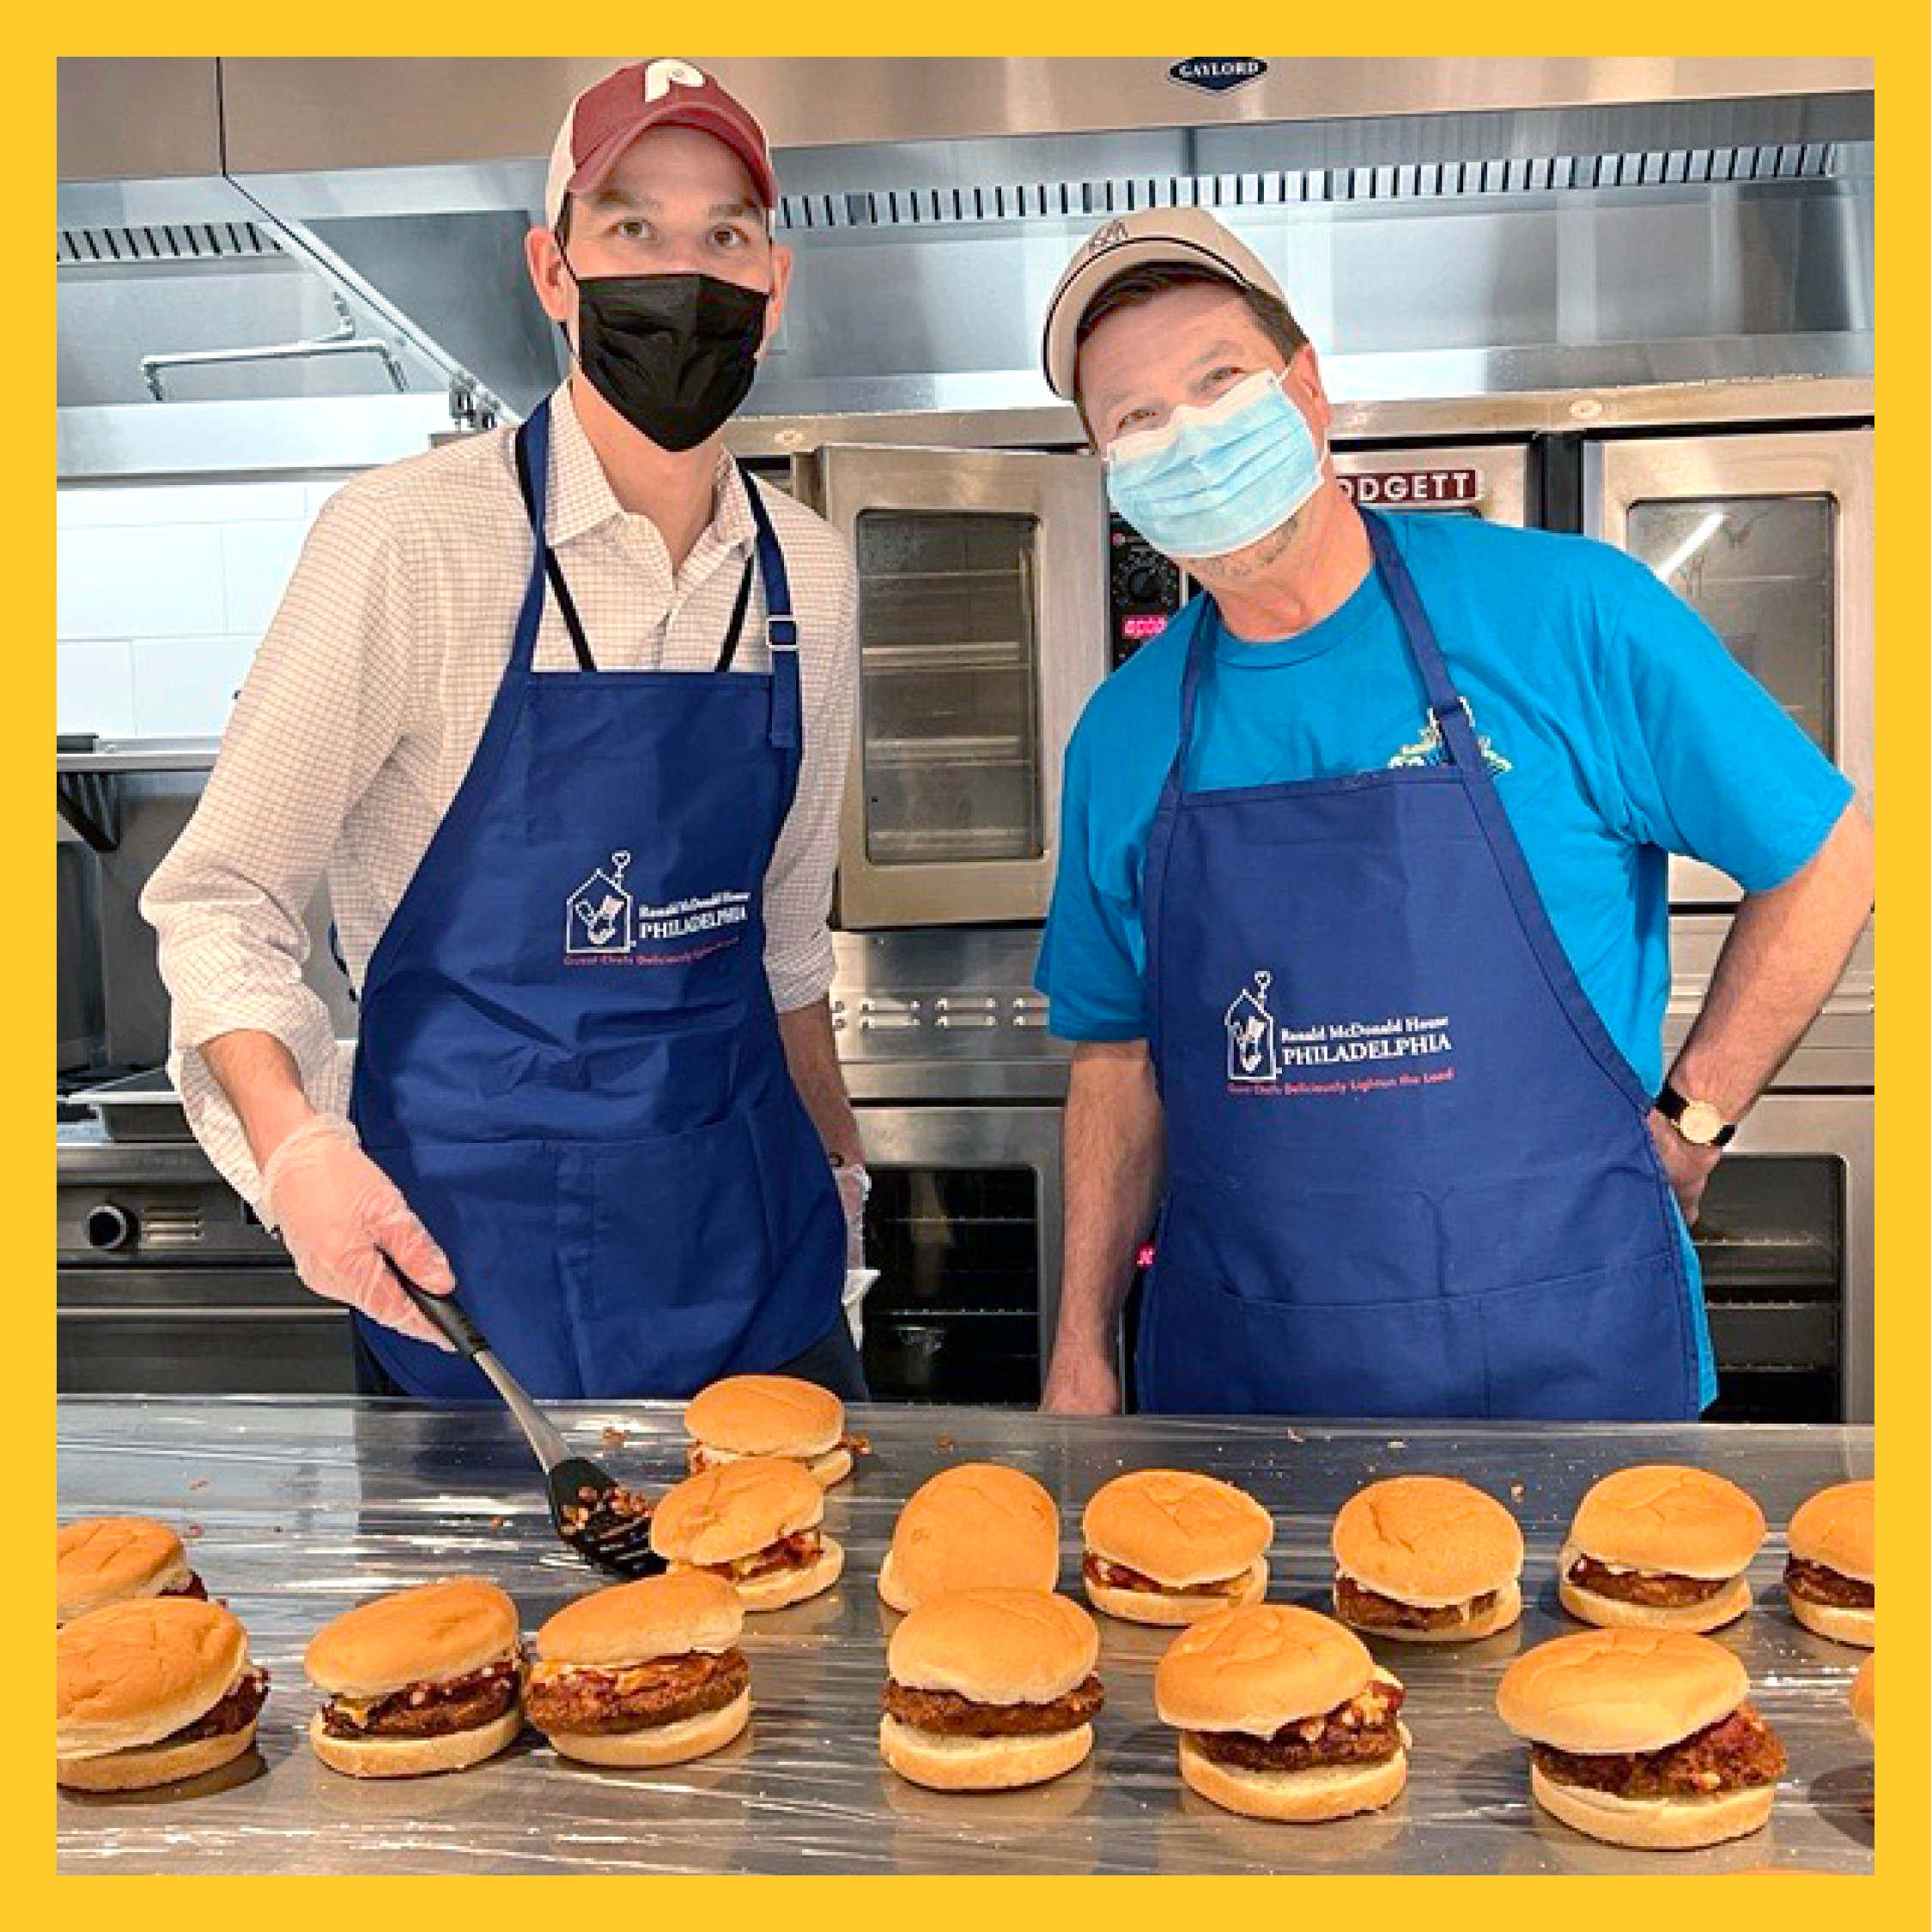 cooking burgers for families